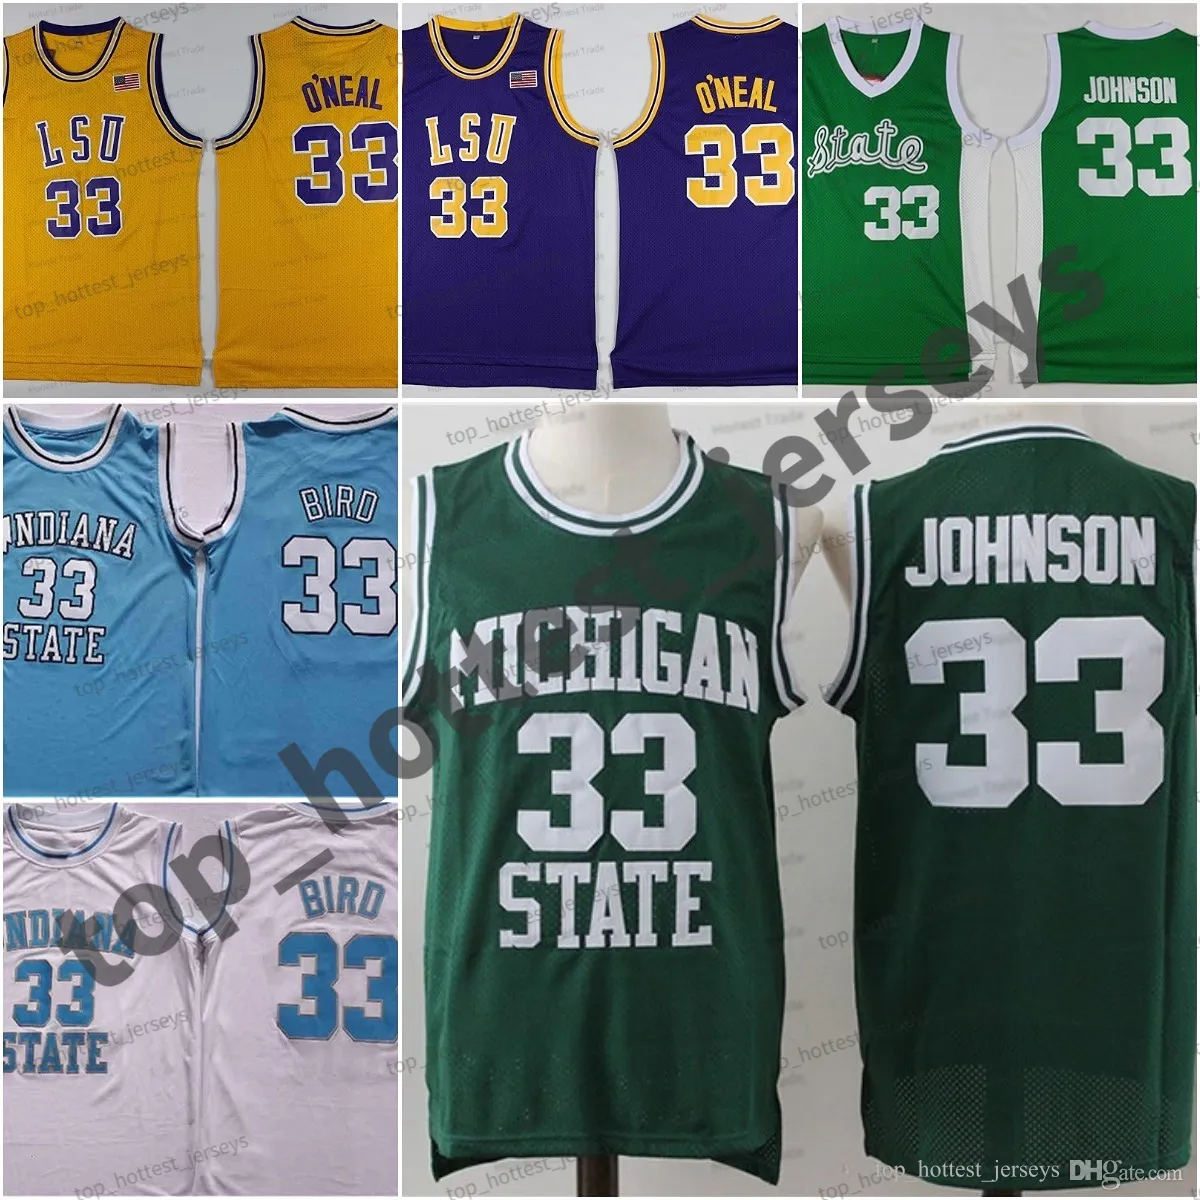 Indiana State Sycamores 33 Larry Bird White Jersey 33 Johnson Green LSU Tigers 33 Shaquille ONeal Michigan College Football Jerseys Mens All Stitched Shirts